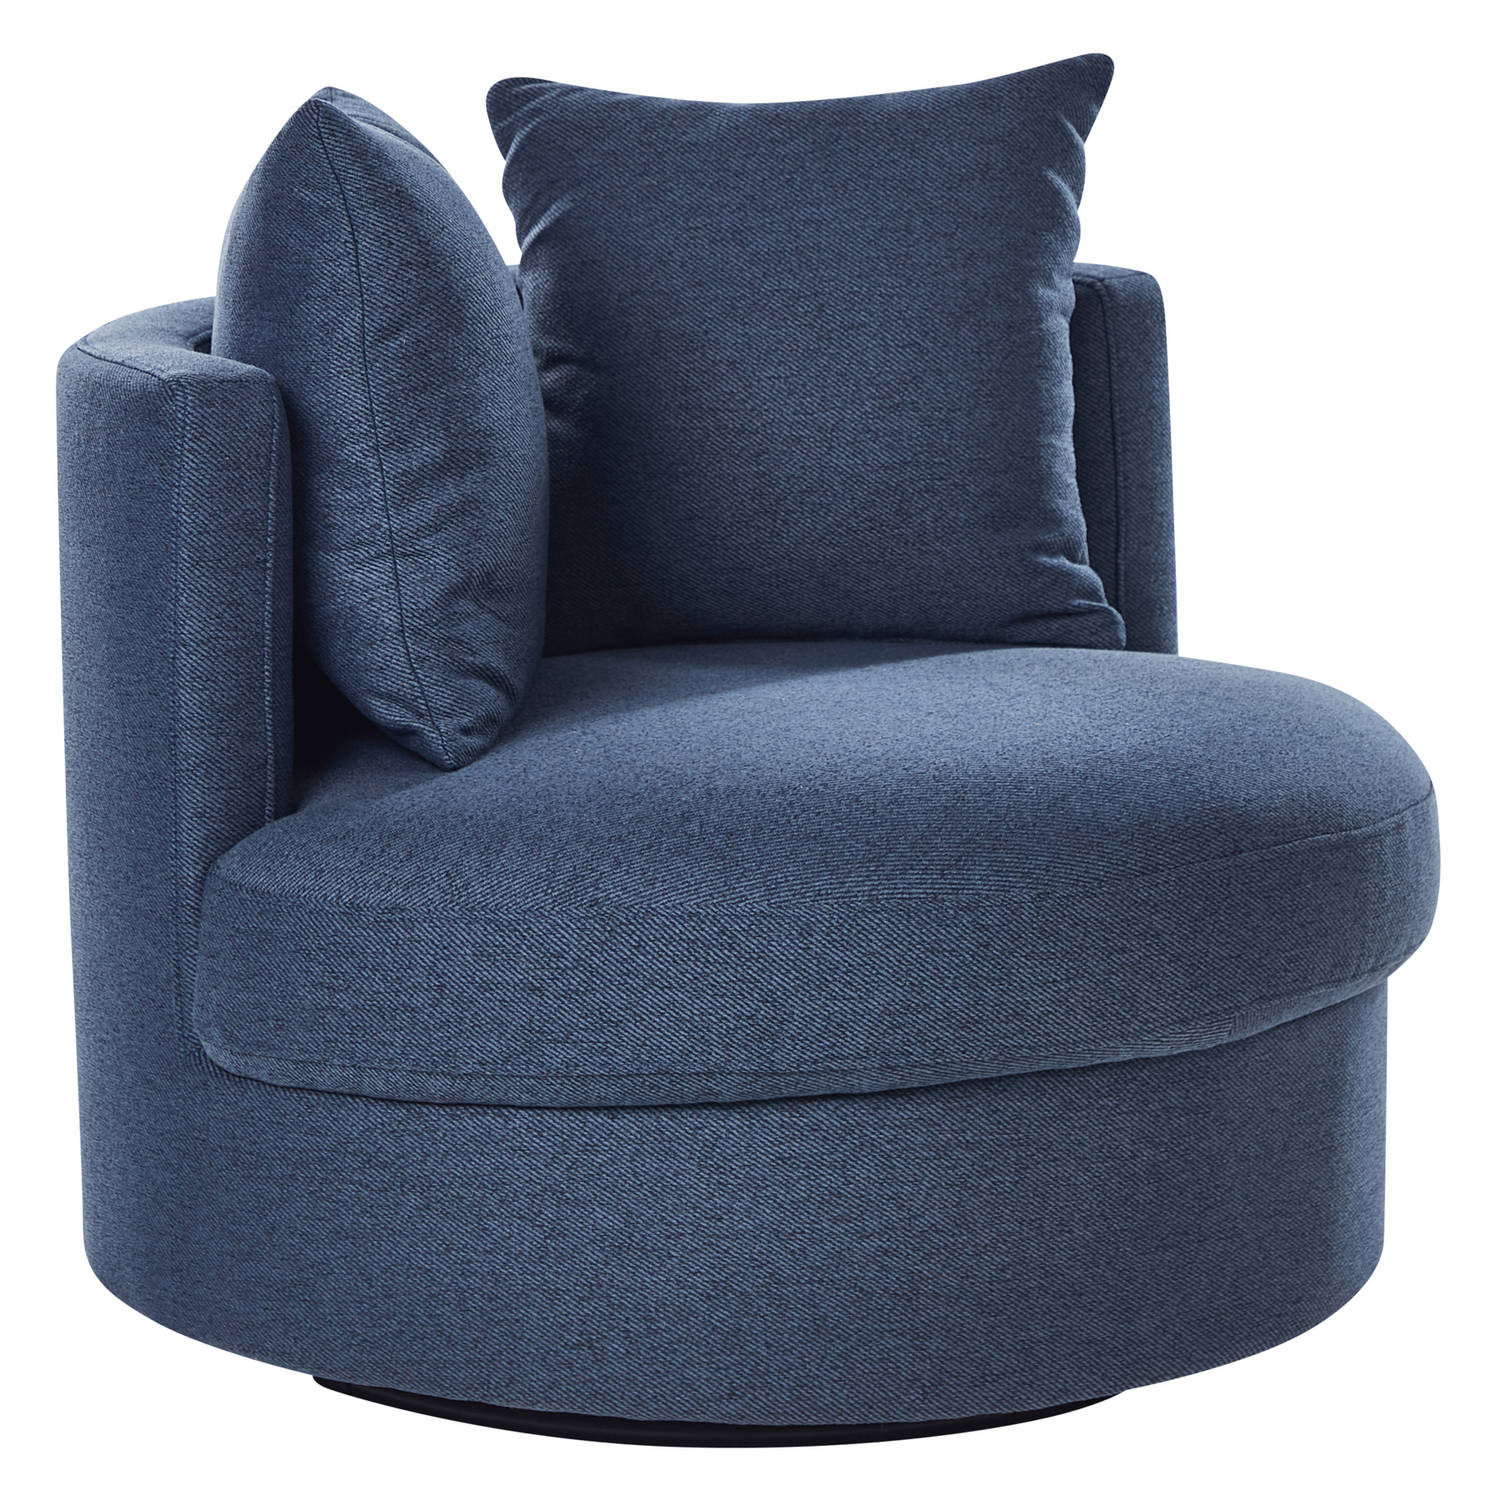 DALBY - Fauteuil - Blauw - Stof